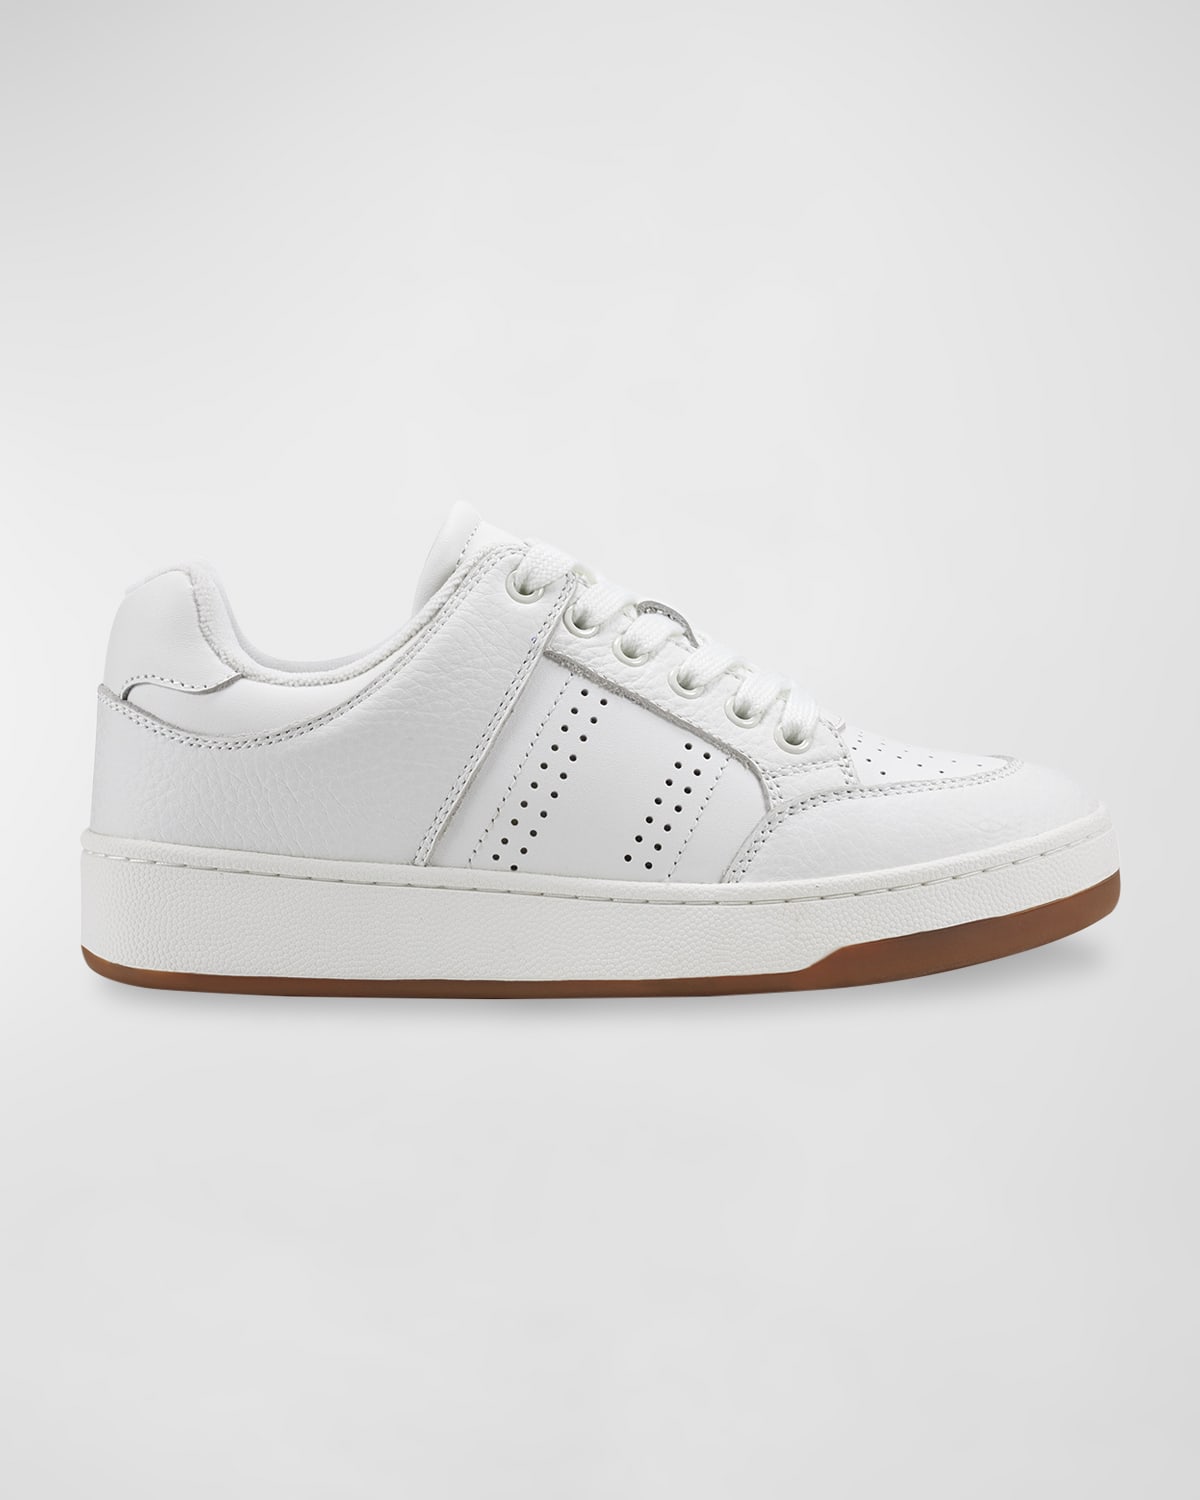 Flynnt Bicolor Leather Low-Top Sneakers